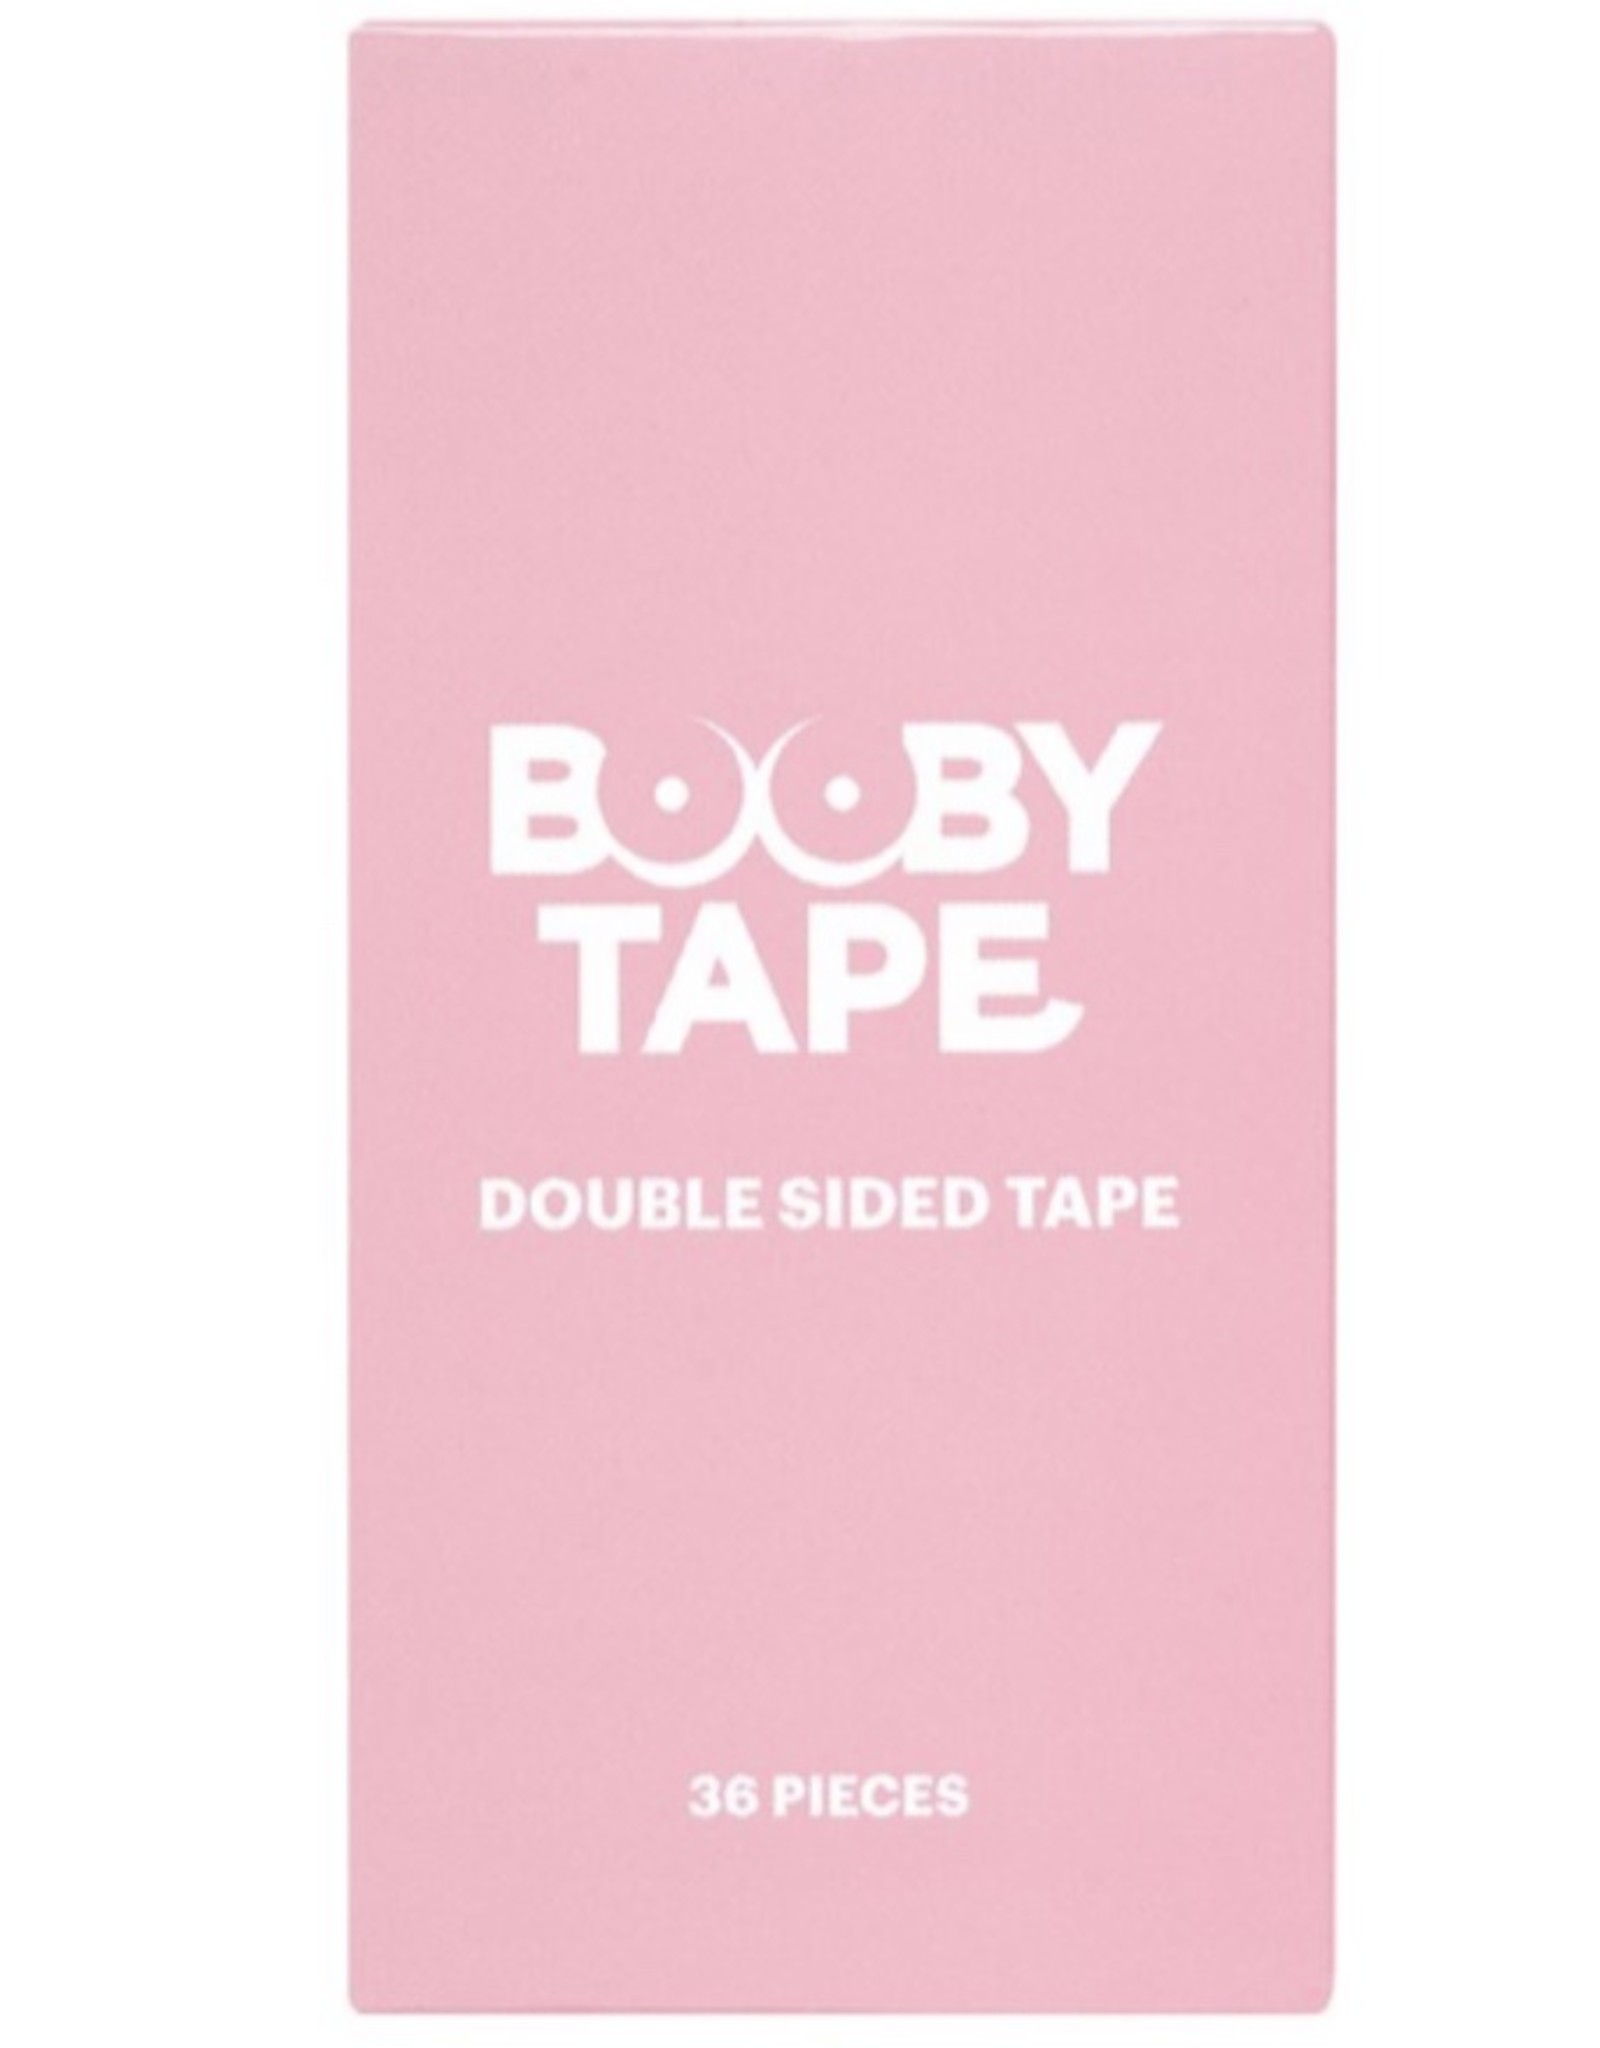 Booby Tape BT Double Sided Tape